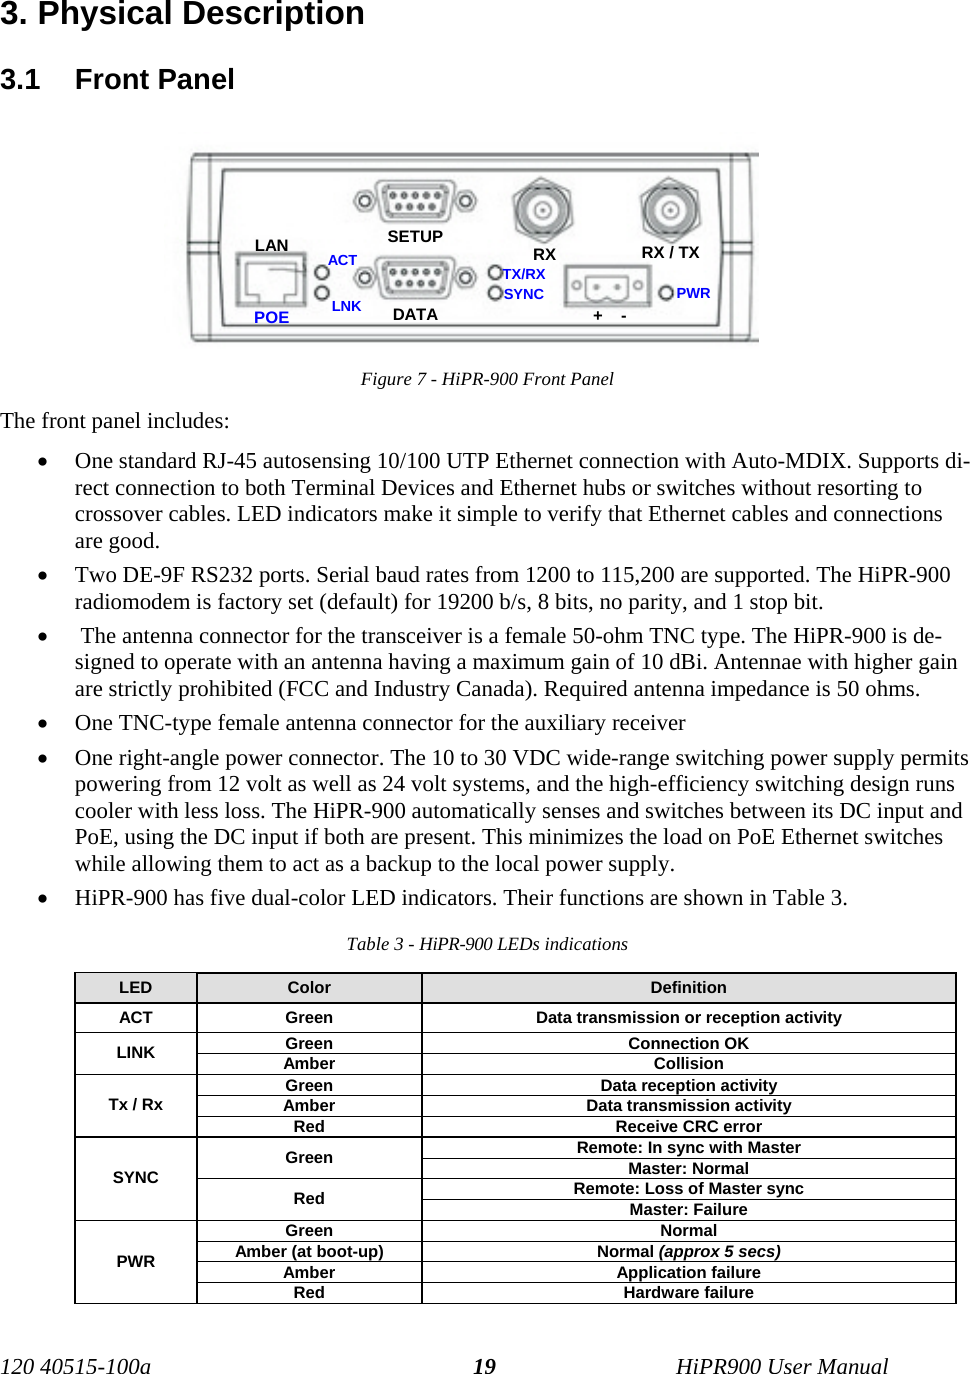  3. Physical Description 3.1 Front Panel  PWR SYNCLNK ACT +    - RX / TXRX TX/RXDATA SETUP POE LAN Figure 7 - HiPR-900 Front Panel The front panel includes: •  One standard RJ-45 autosensing 10/100 UTP Ethernet connection with Auto-MDIX. Supports di-rect connection to both Terminal Devices and Ethernet hubs or switches without resorting to crossover cables. LED indicators make it simple to verify that Ethernet cables and connections are good. •  Two DE-9F RS232 ports. Serial baud rates from 1200 to 115,200 are supported. The HiPR-900 radiomodem is factory set (default) for 19200 b/s, 8 bits, no parity, and 1 stop bit. •   The antenna connector for the transceiver is a female 50-ohm TNC type. The HiPR-900 is de-signed to operate with an antenna having a maximum gain of 10 dBi. Antennae with higher gain are strictly prohibited (FCC and Industry Canada). Required antenna impedance is 50 ohms. •  One TNC-type female antenna connector for the auxiliary receiver •  One right-angle power connector. The 10 to 30 VDC wide-range switching power supply permits powering from 12 volt as well as 24 volt systems, and the high-efficiency switching design runs cooler with less loss. The HiPR-900 automatically senses and switches between its DC input and PoE, using the DC input if both are present. This minimizes the load on PoE Ethernet switches while allowing them to act as a backup to the local power supply. •  HiPR-900 has five dual-color LED indicators. Their functions are shown in Table 3. Table 3 - HiPR-900 LEDs indications LED  Color  Definition ACT  Green  Data transmission or reception activity Green Connection OK LINK  Amber Collision Green  Data reception activity Amber  Data transmission activity Tx / Rx Red  Receive CRC error Remote: In sync with Master Green  Master: Normal Remote: Loss of Master sync SYNC   Red  Master: Failure Green Normal Amber (at boot-up)  Normal (approx 5 secs) Amber Application failure PWR  Red Hardware failure 120 40515-100a   HiPR900 User Manual 19